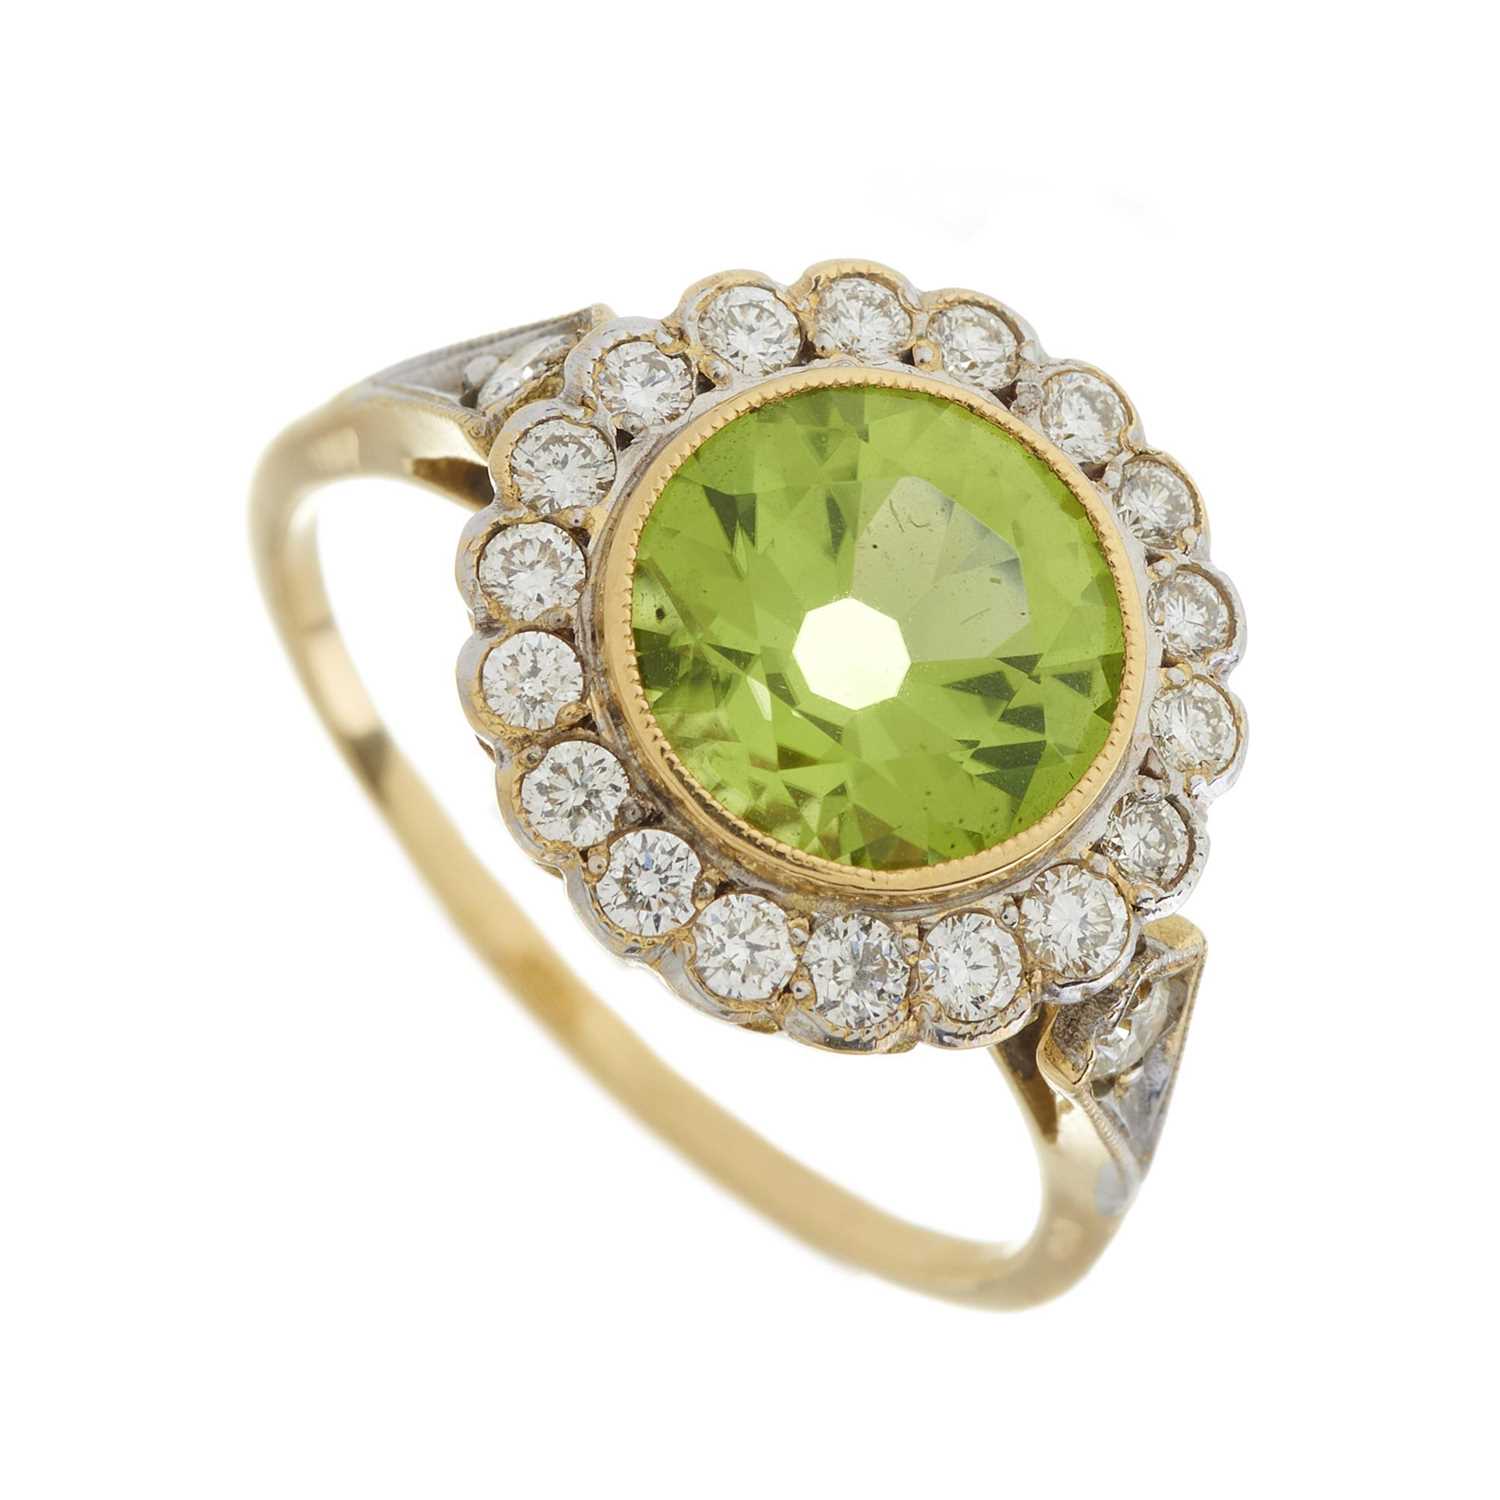 An 18ct gold peridot and diamond cluster ring - Image 3 of 3